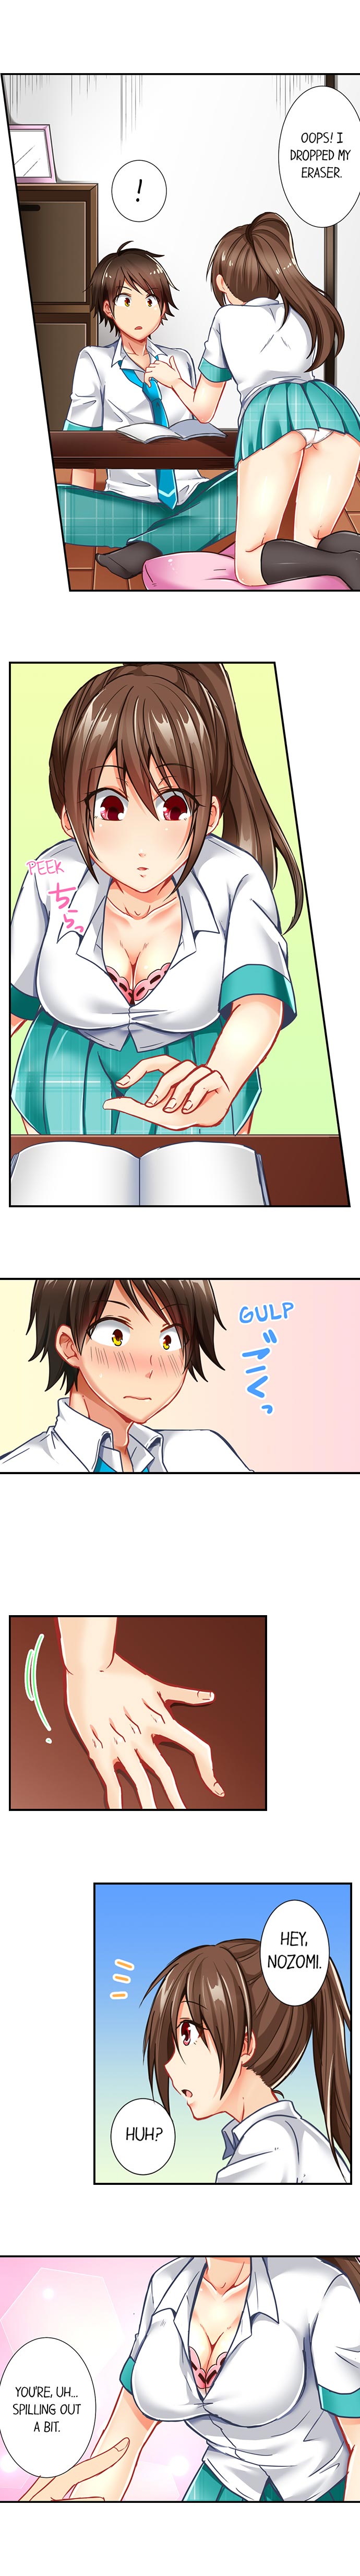 80% of the Swimming Club Girls Are Shaved - Chapter 1 Page 4